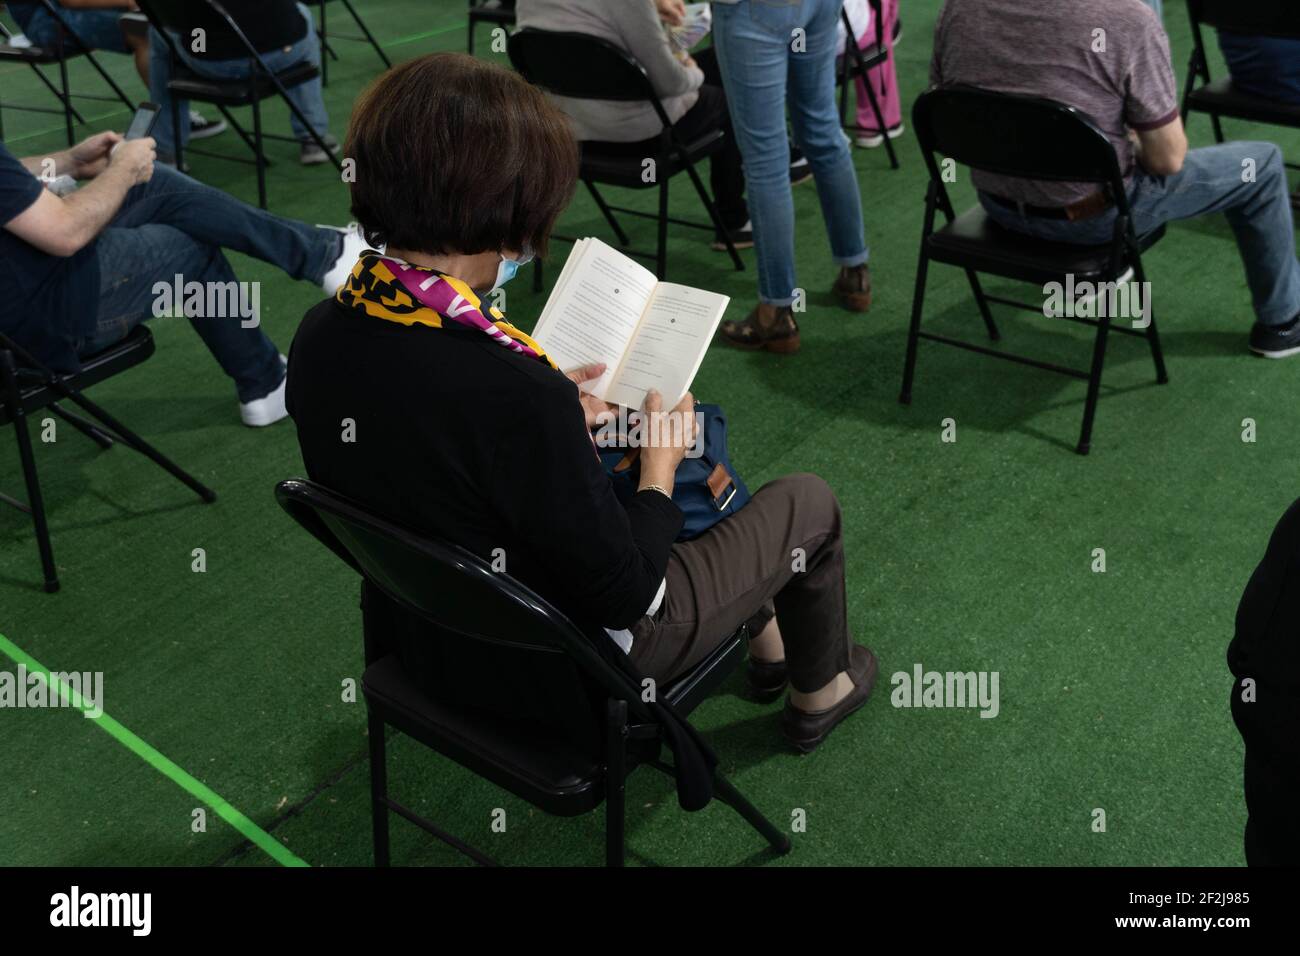 Santiago, Metropolitana, Chile. 12th Mar, 2021. A woman vaccinated with the Sinovac vaccine reads a book in the waiting room, where patients must wait 30 minutes after being vaccinated. Credit: Matias Basualdo/ZUMA Wire/Alamy Live News Stock Photo